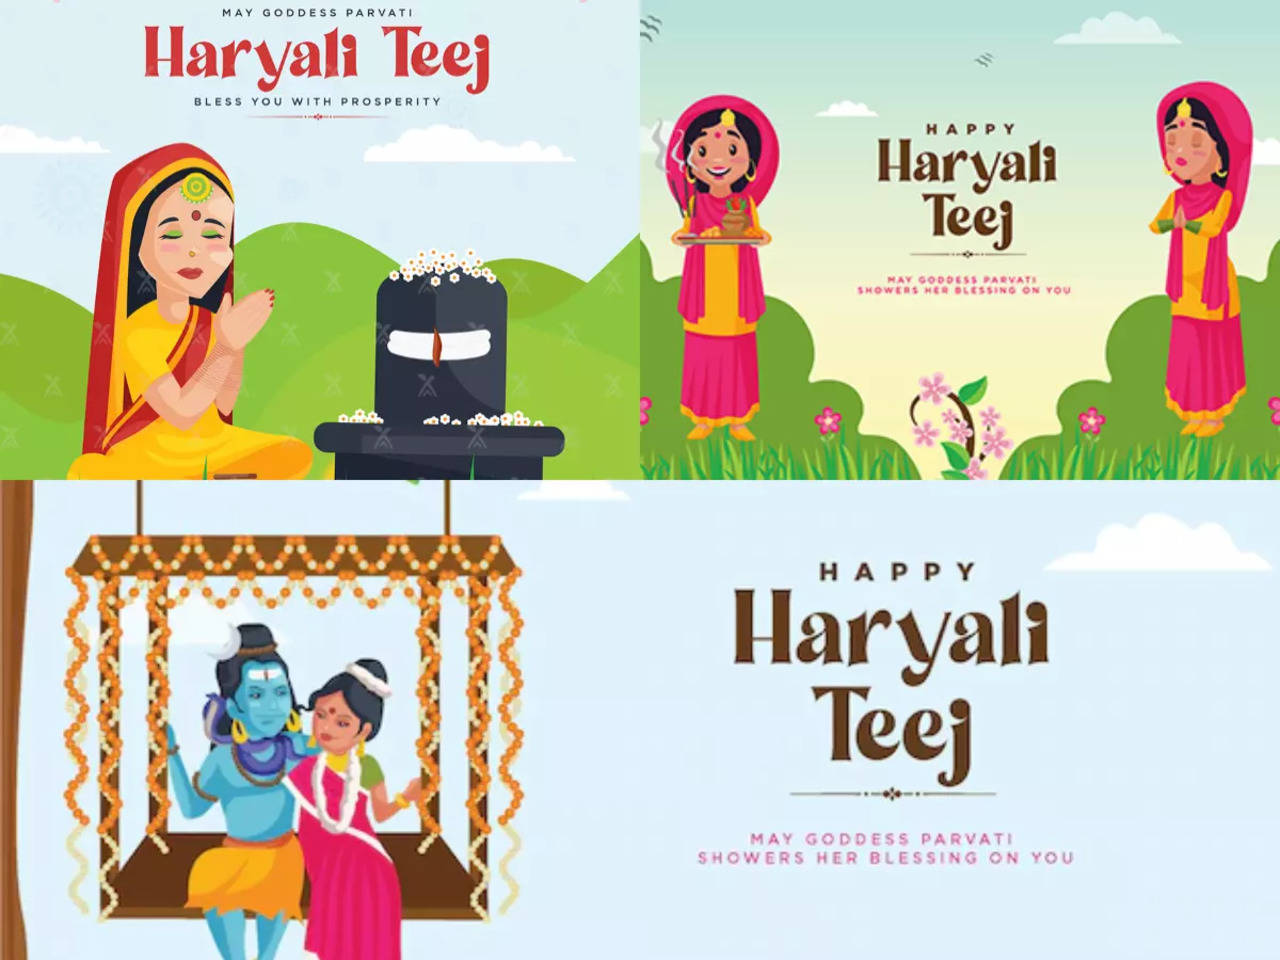 Happy Hartalika Teej 2019 Wishes Images HD, Status, Quotes, Wallpapers  Download, GIF Pics, Photos, Messages, SMS, Pictures and Greetings Video